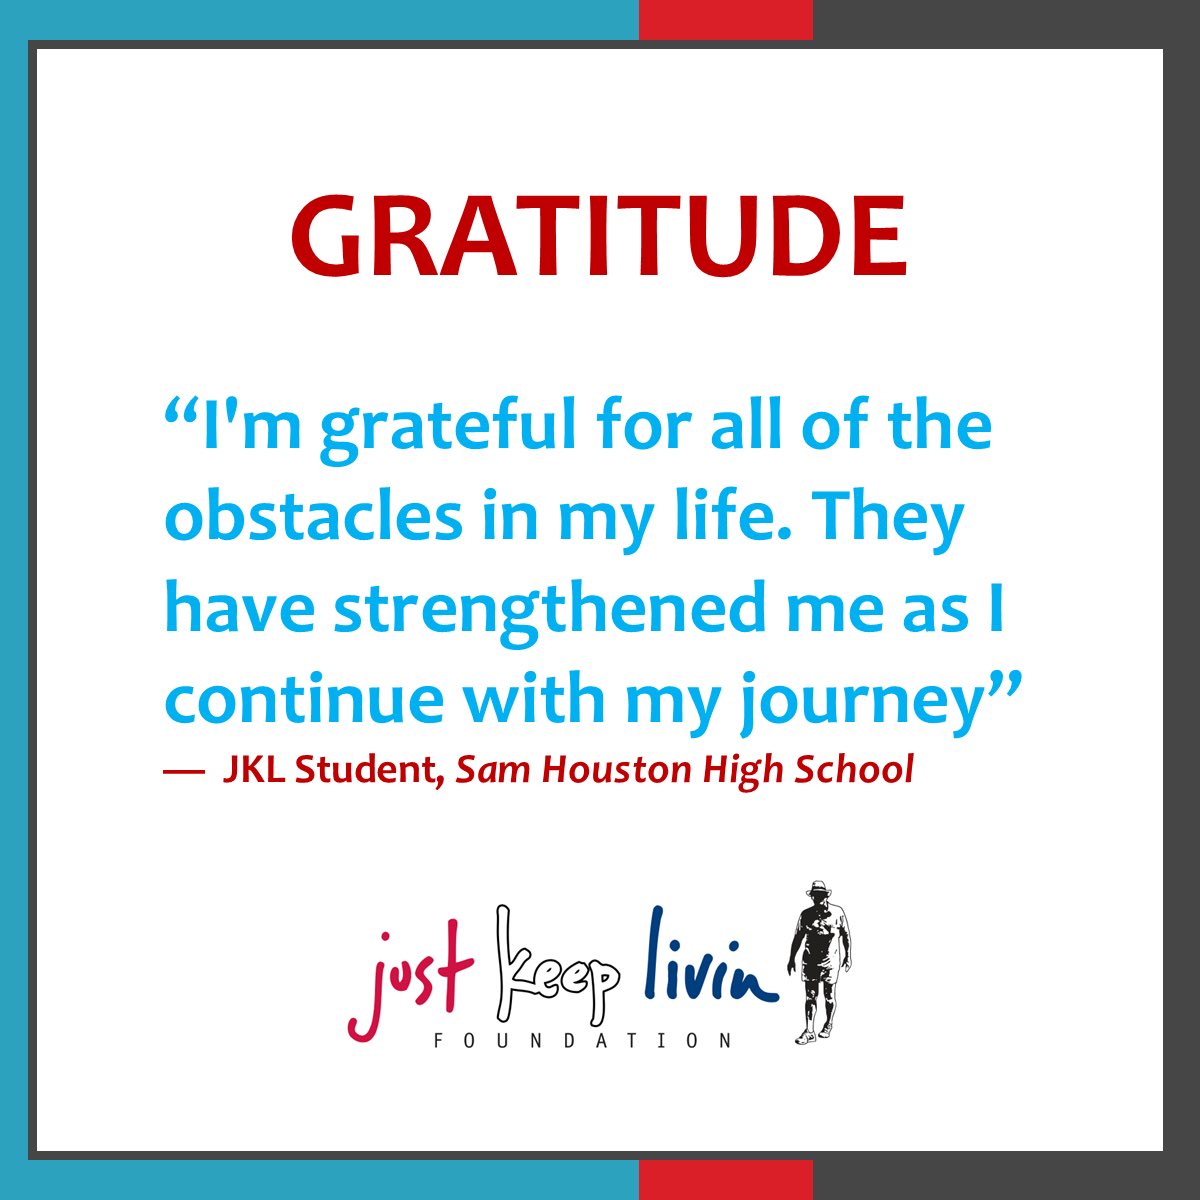 What are you grateful for today? 💙 #justkeeplivin #gratitudecircle